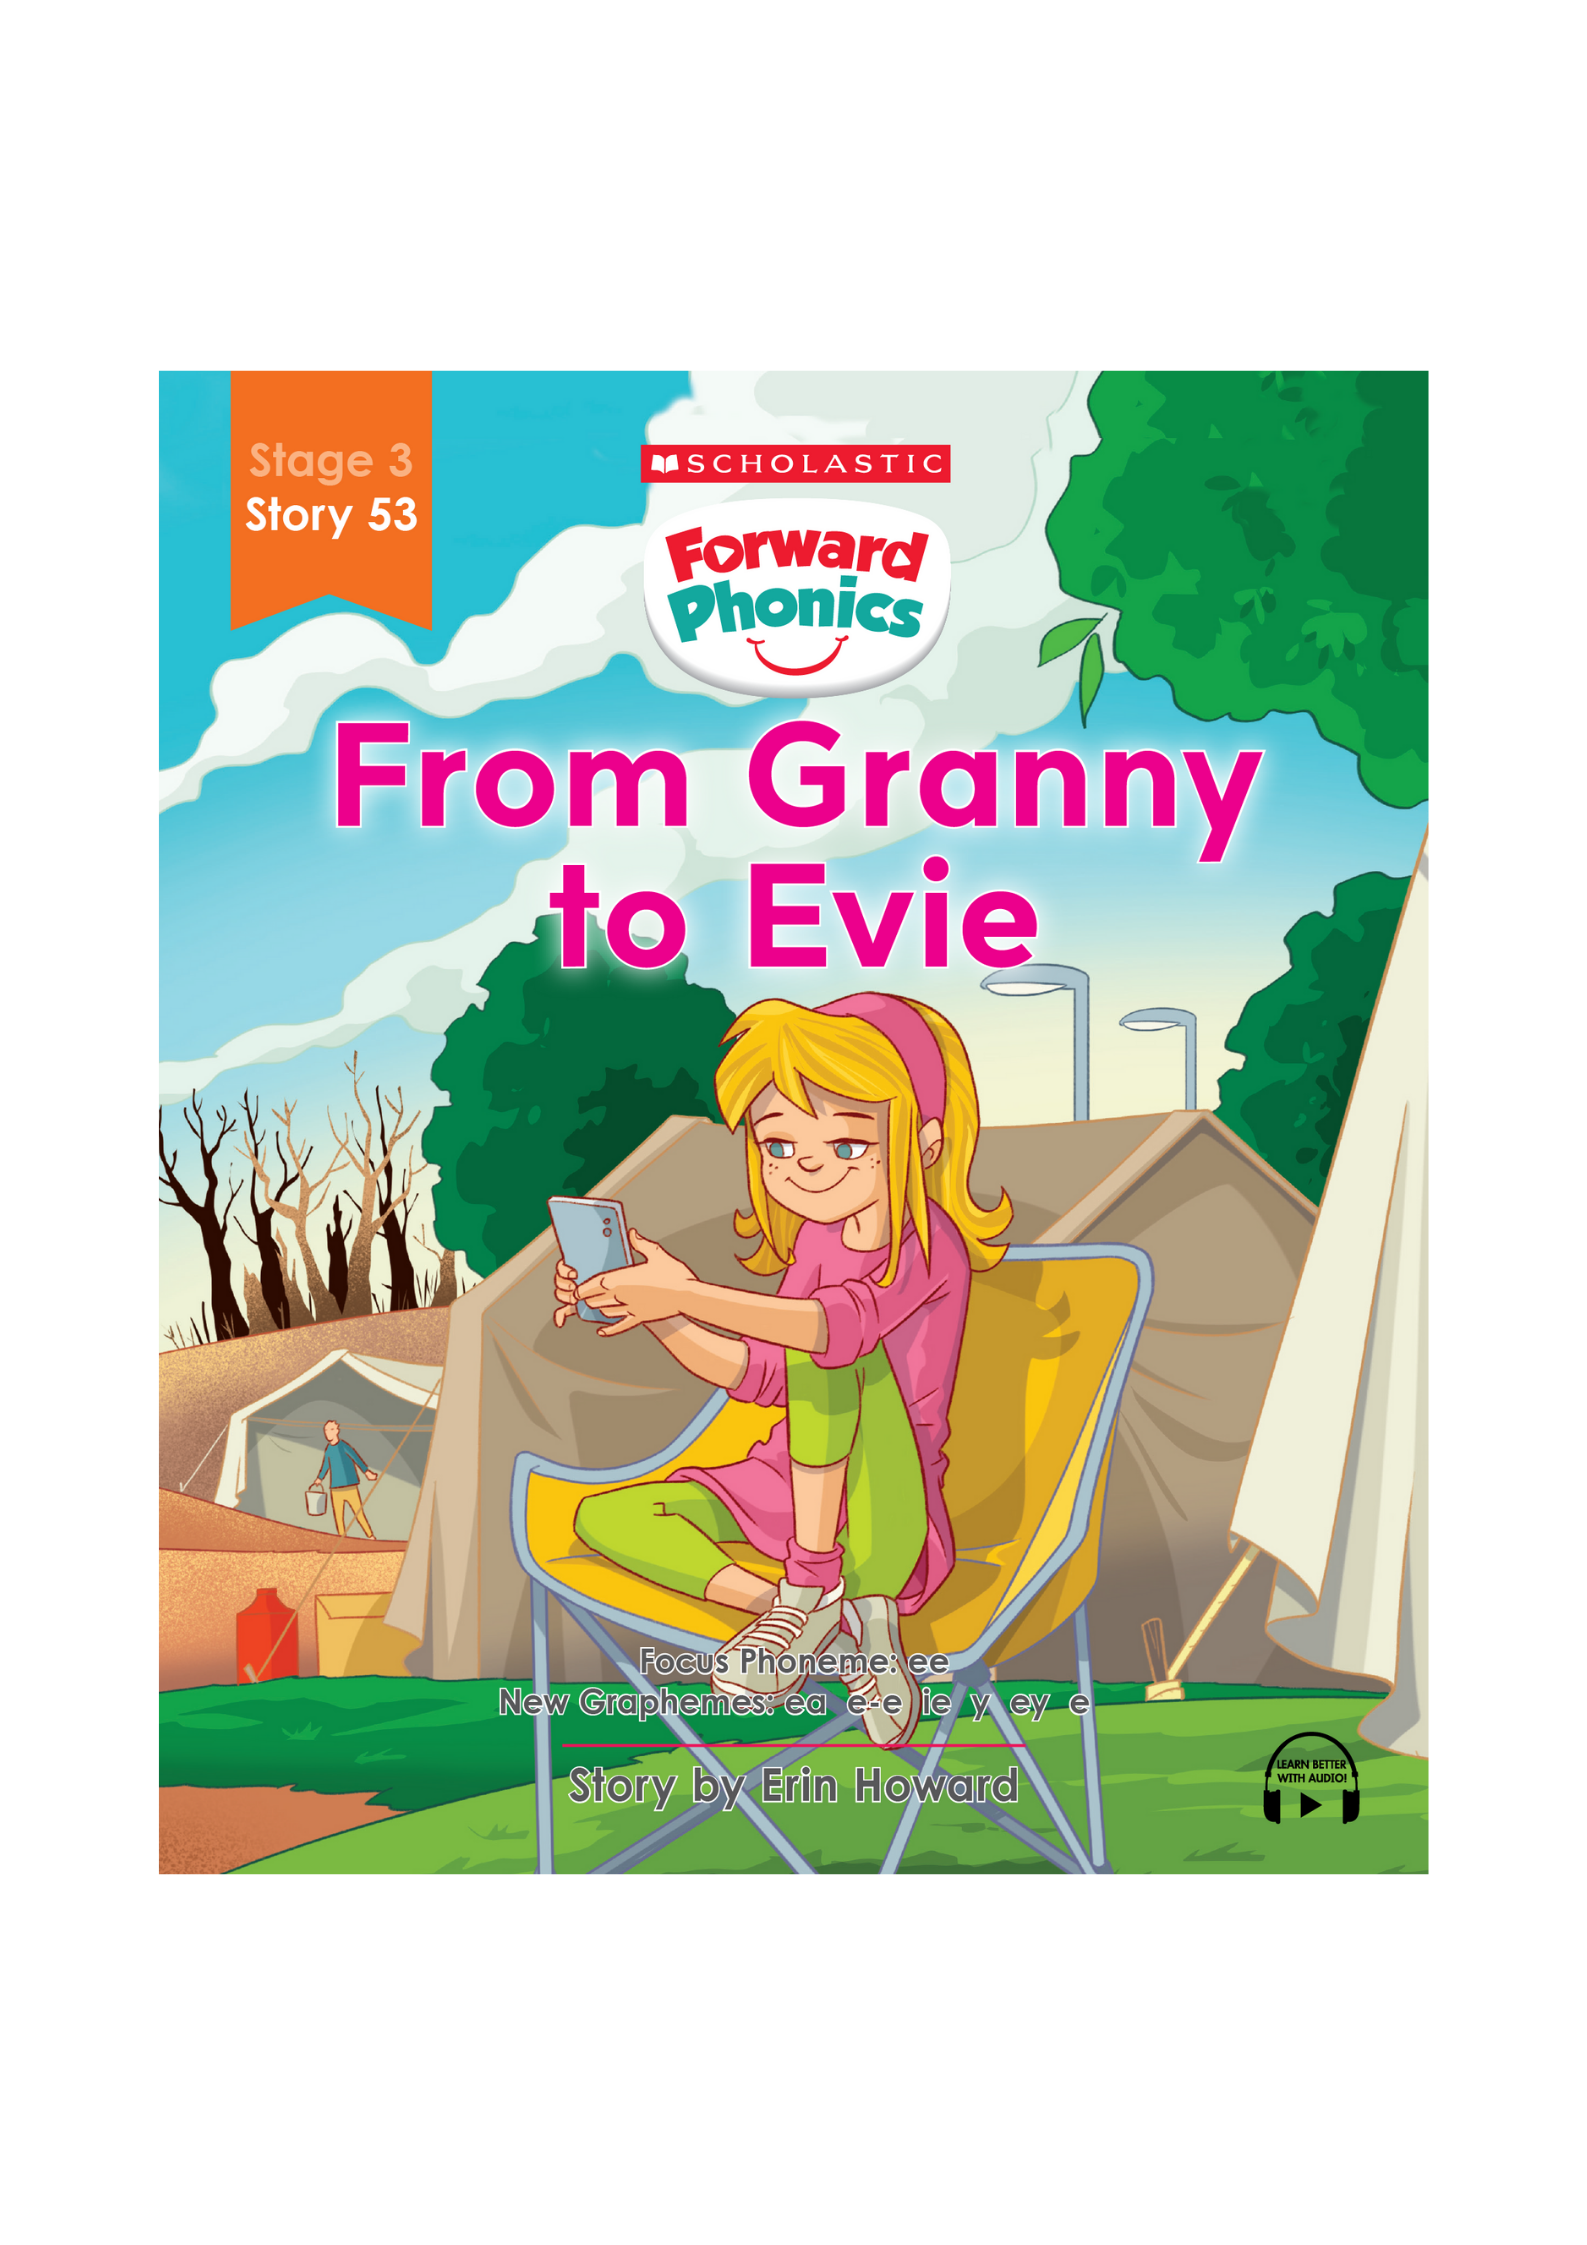 Forward Phonics #53: From Granny to Evie